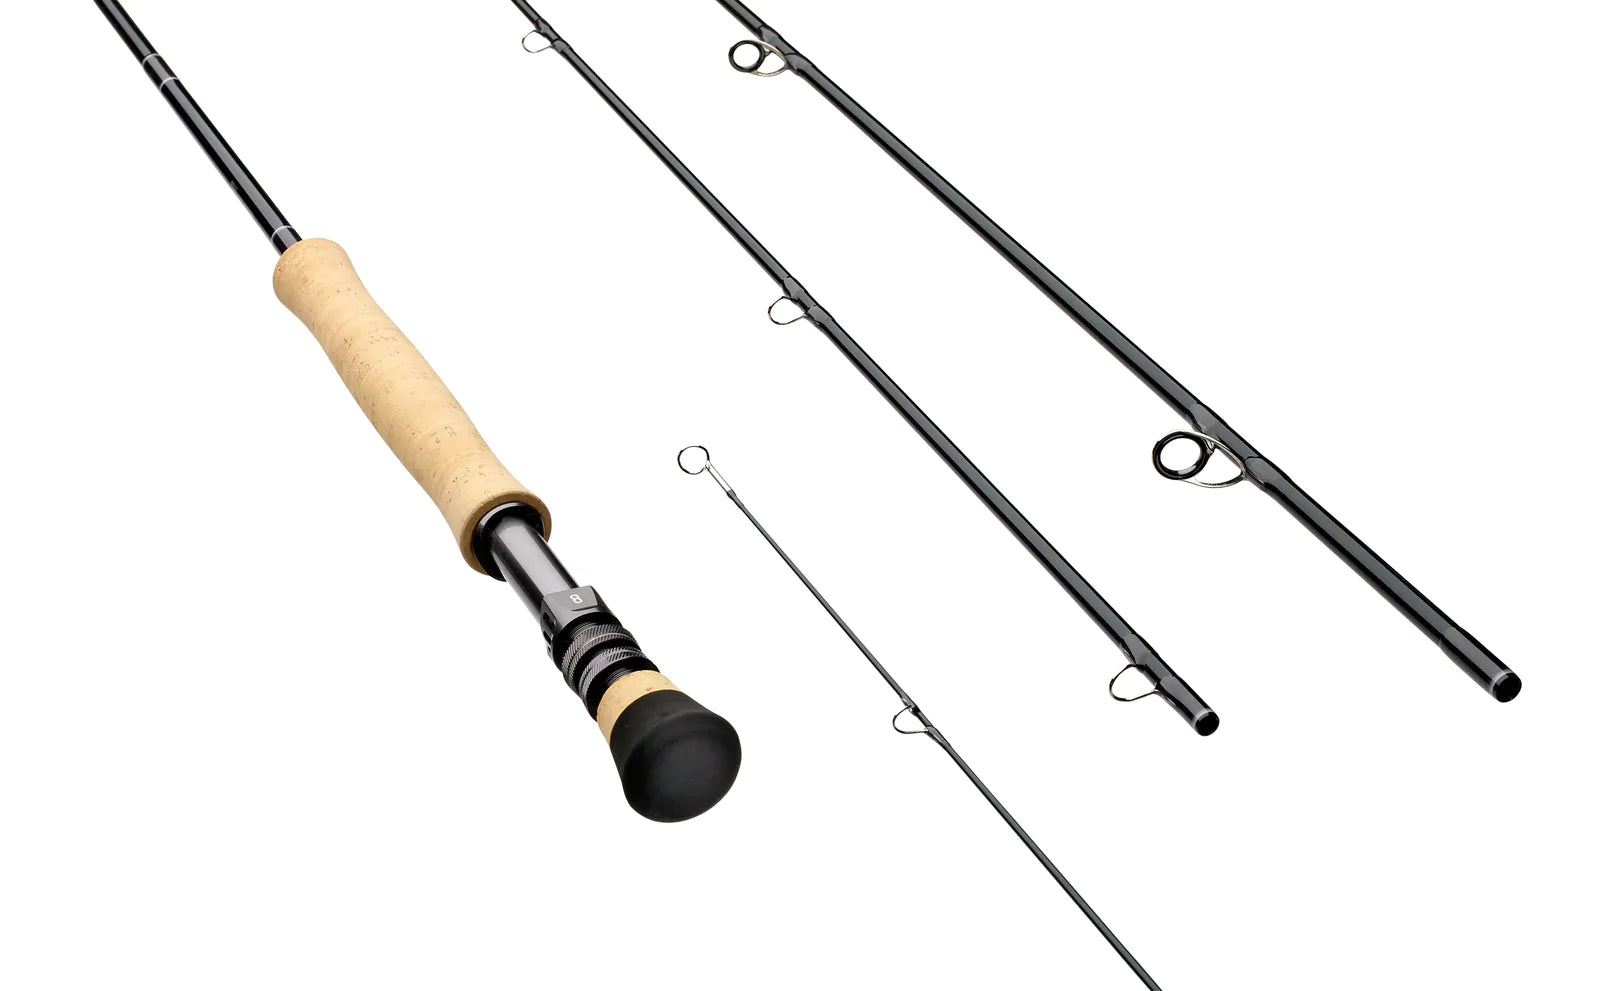 Daiwa S4 Trout Fly 8'0 4 Weight Intermediate Line Fly Fishing